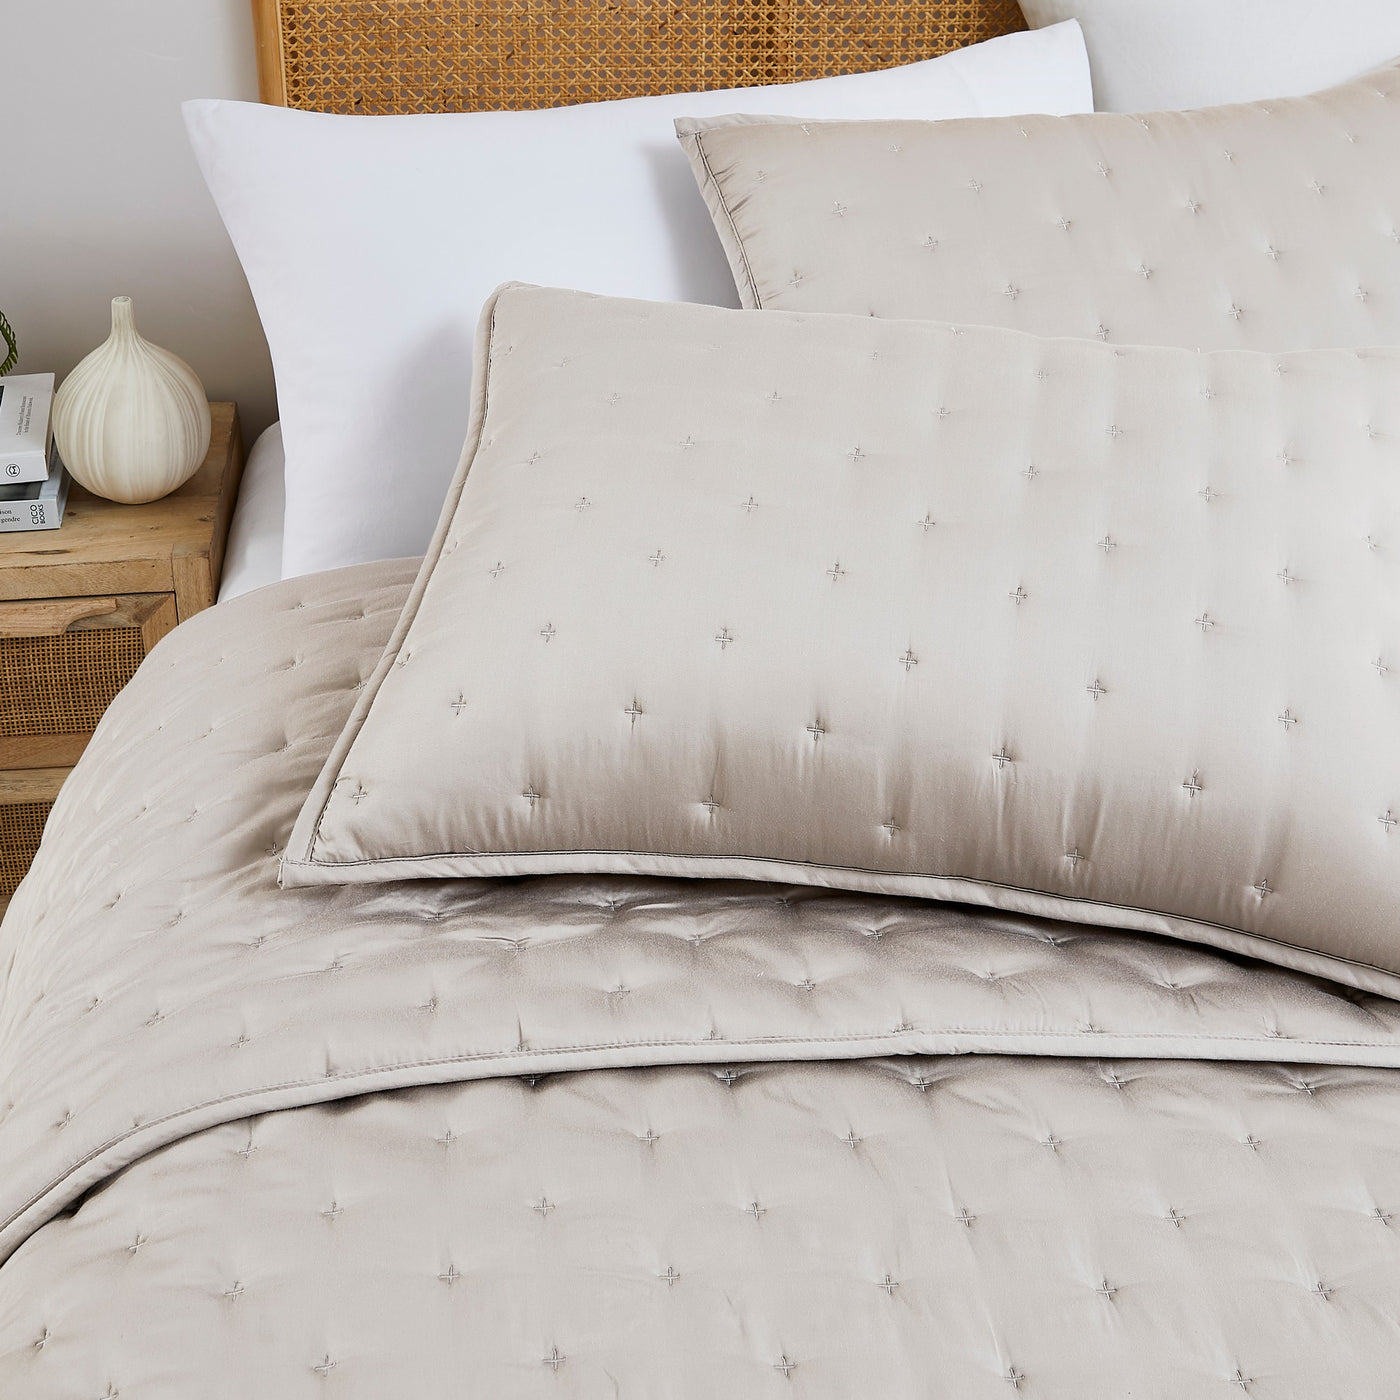 300 Thread Count Bamboo Quilt Set